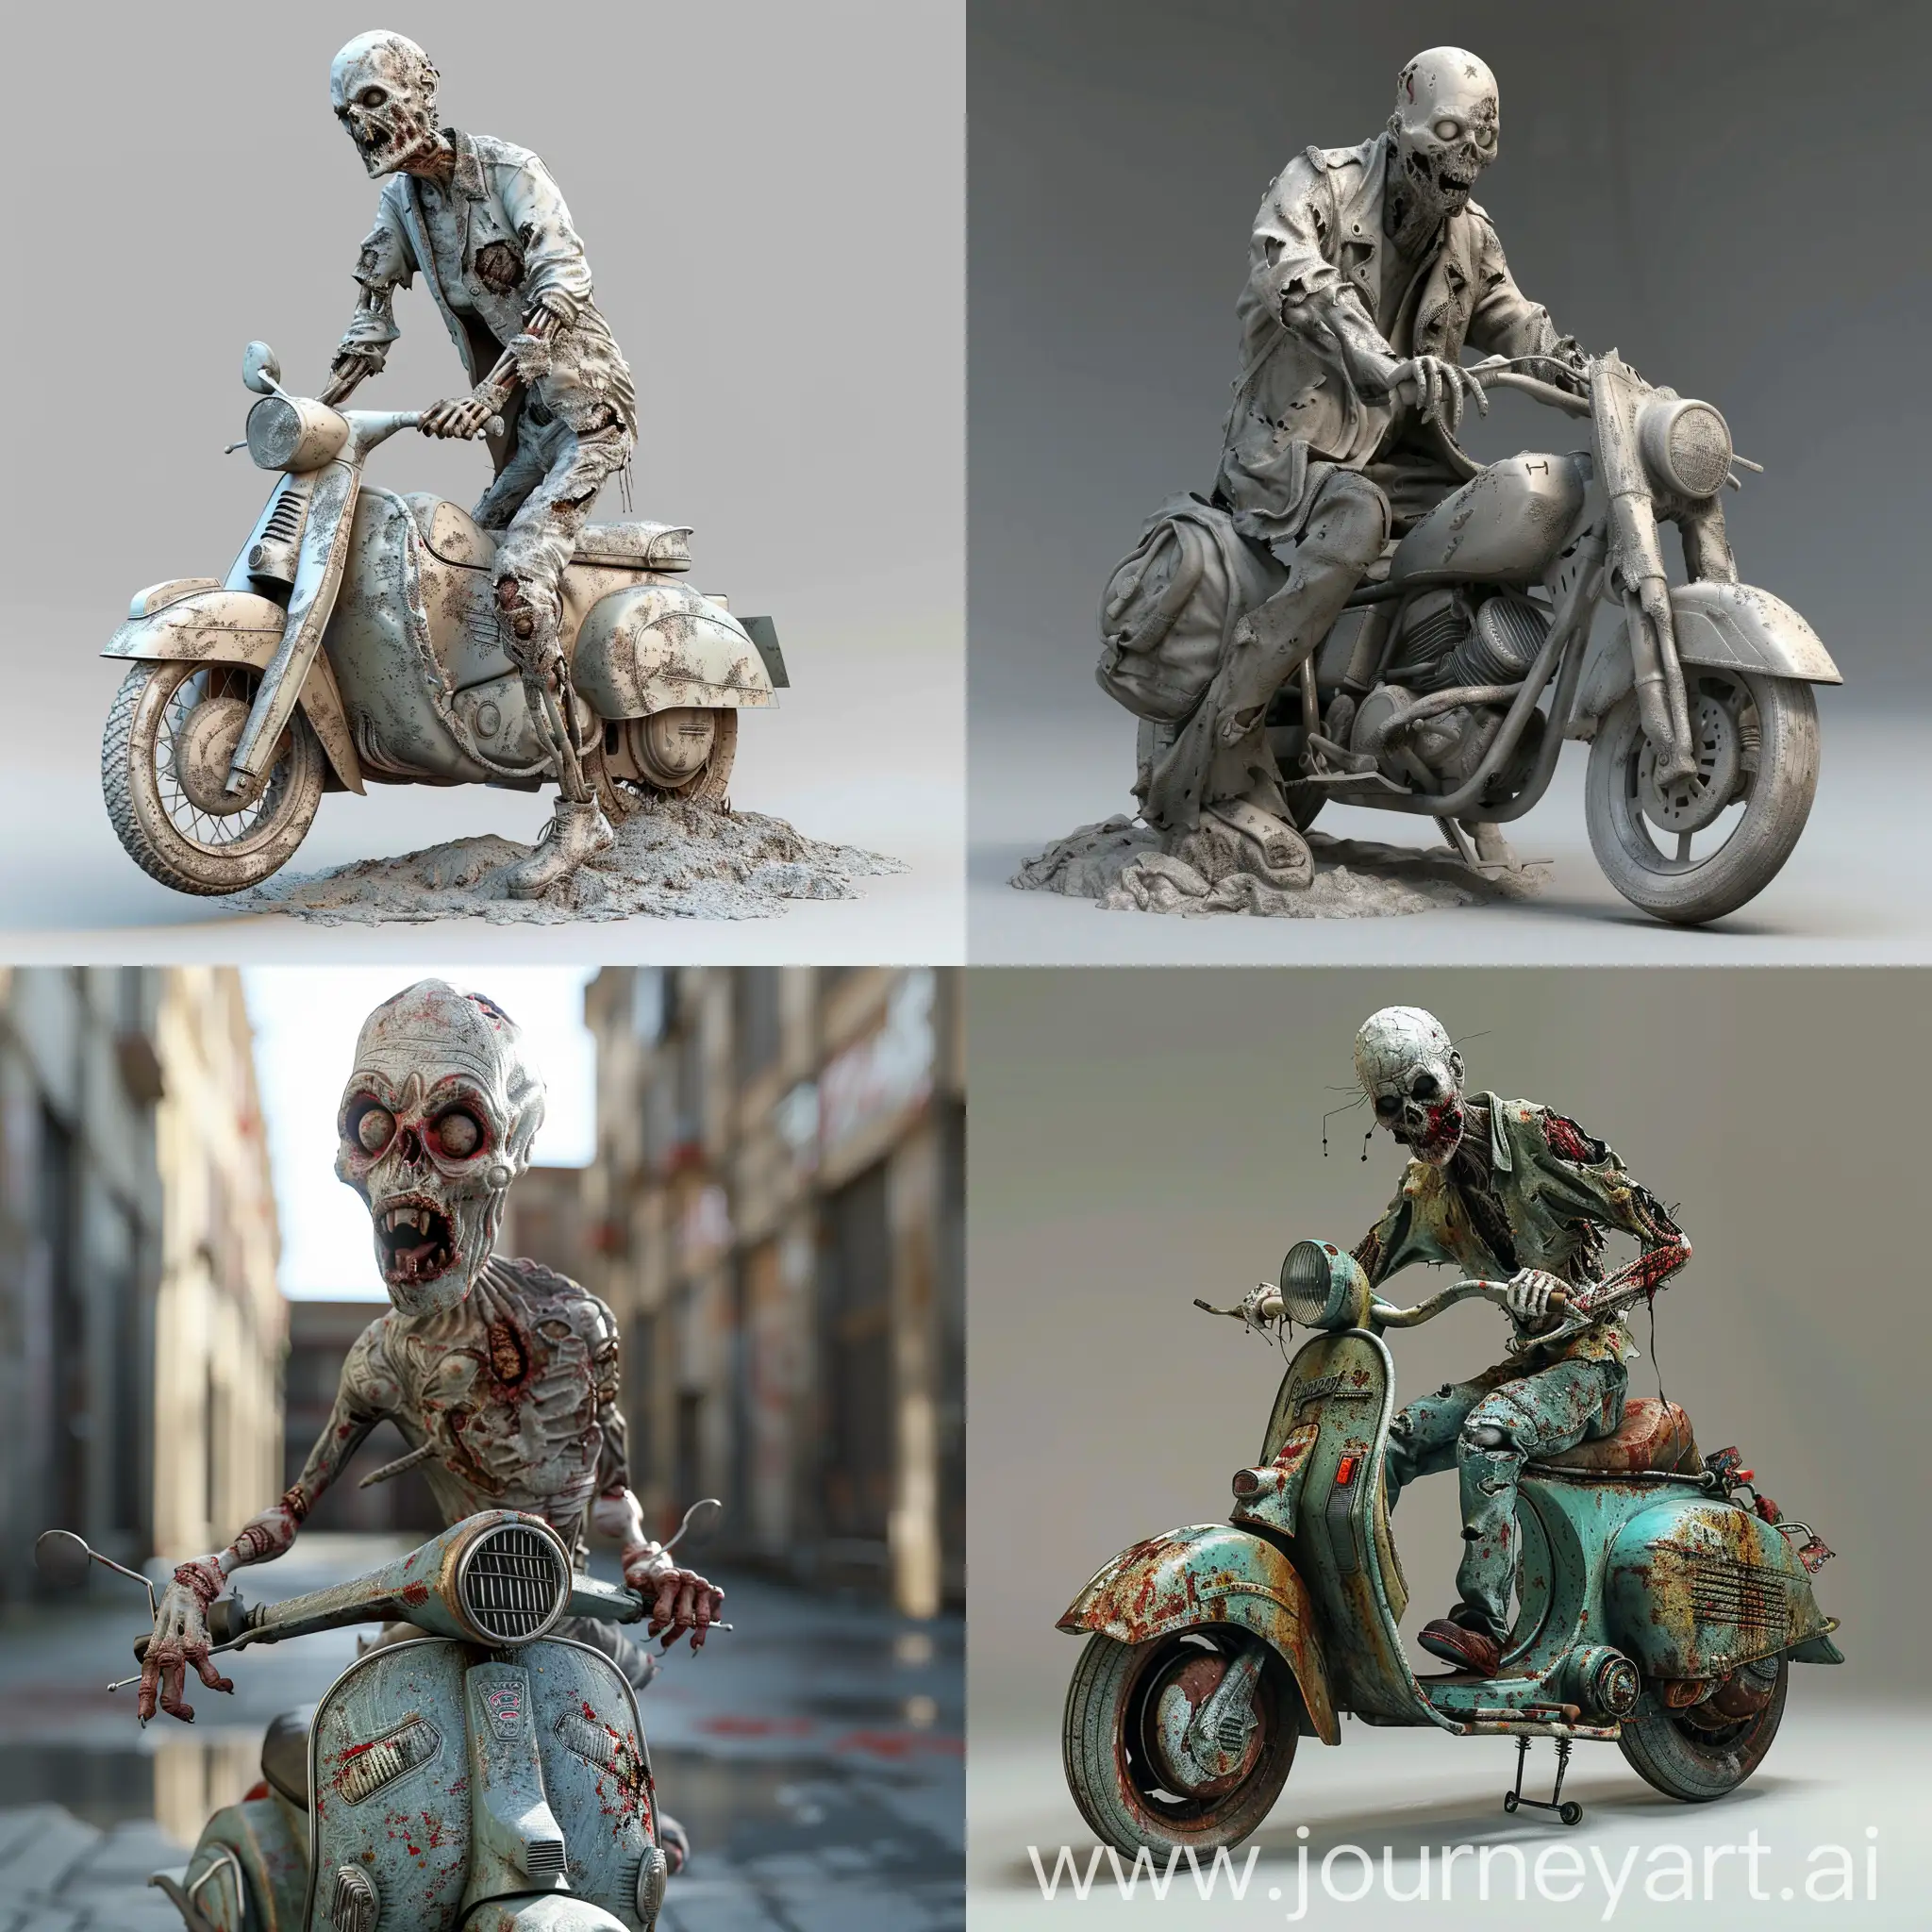 Eerie-Zombie-Riding-a-Motorcycle-in-Muted-Tones